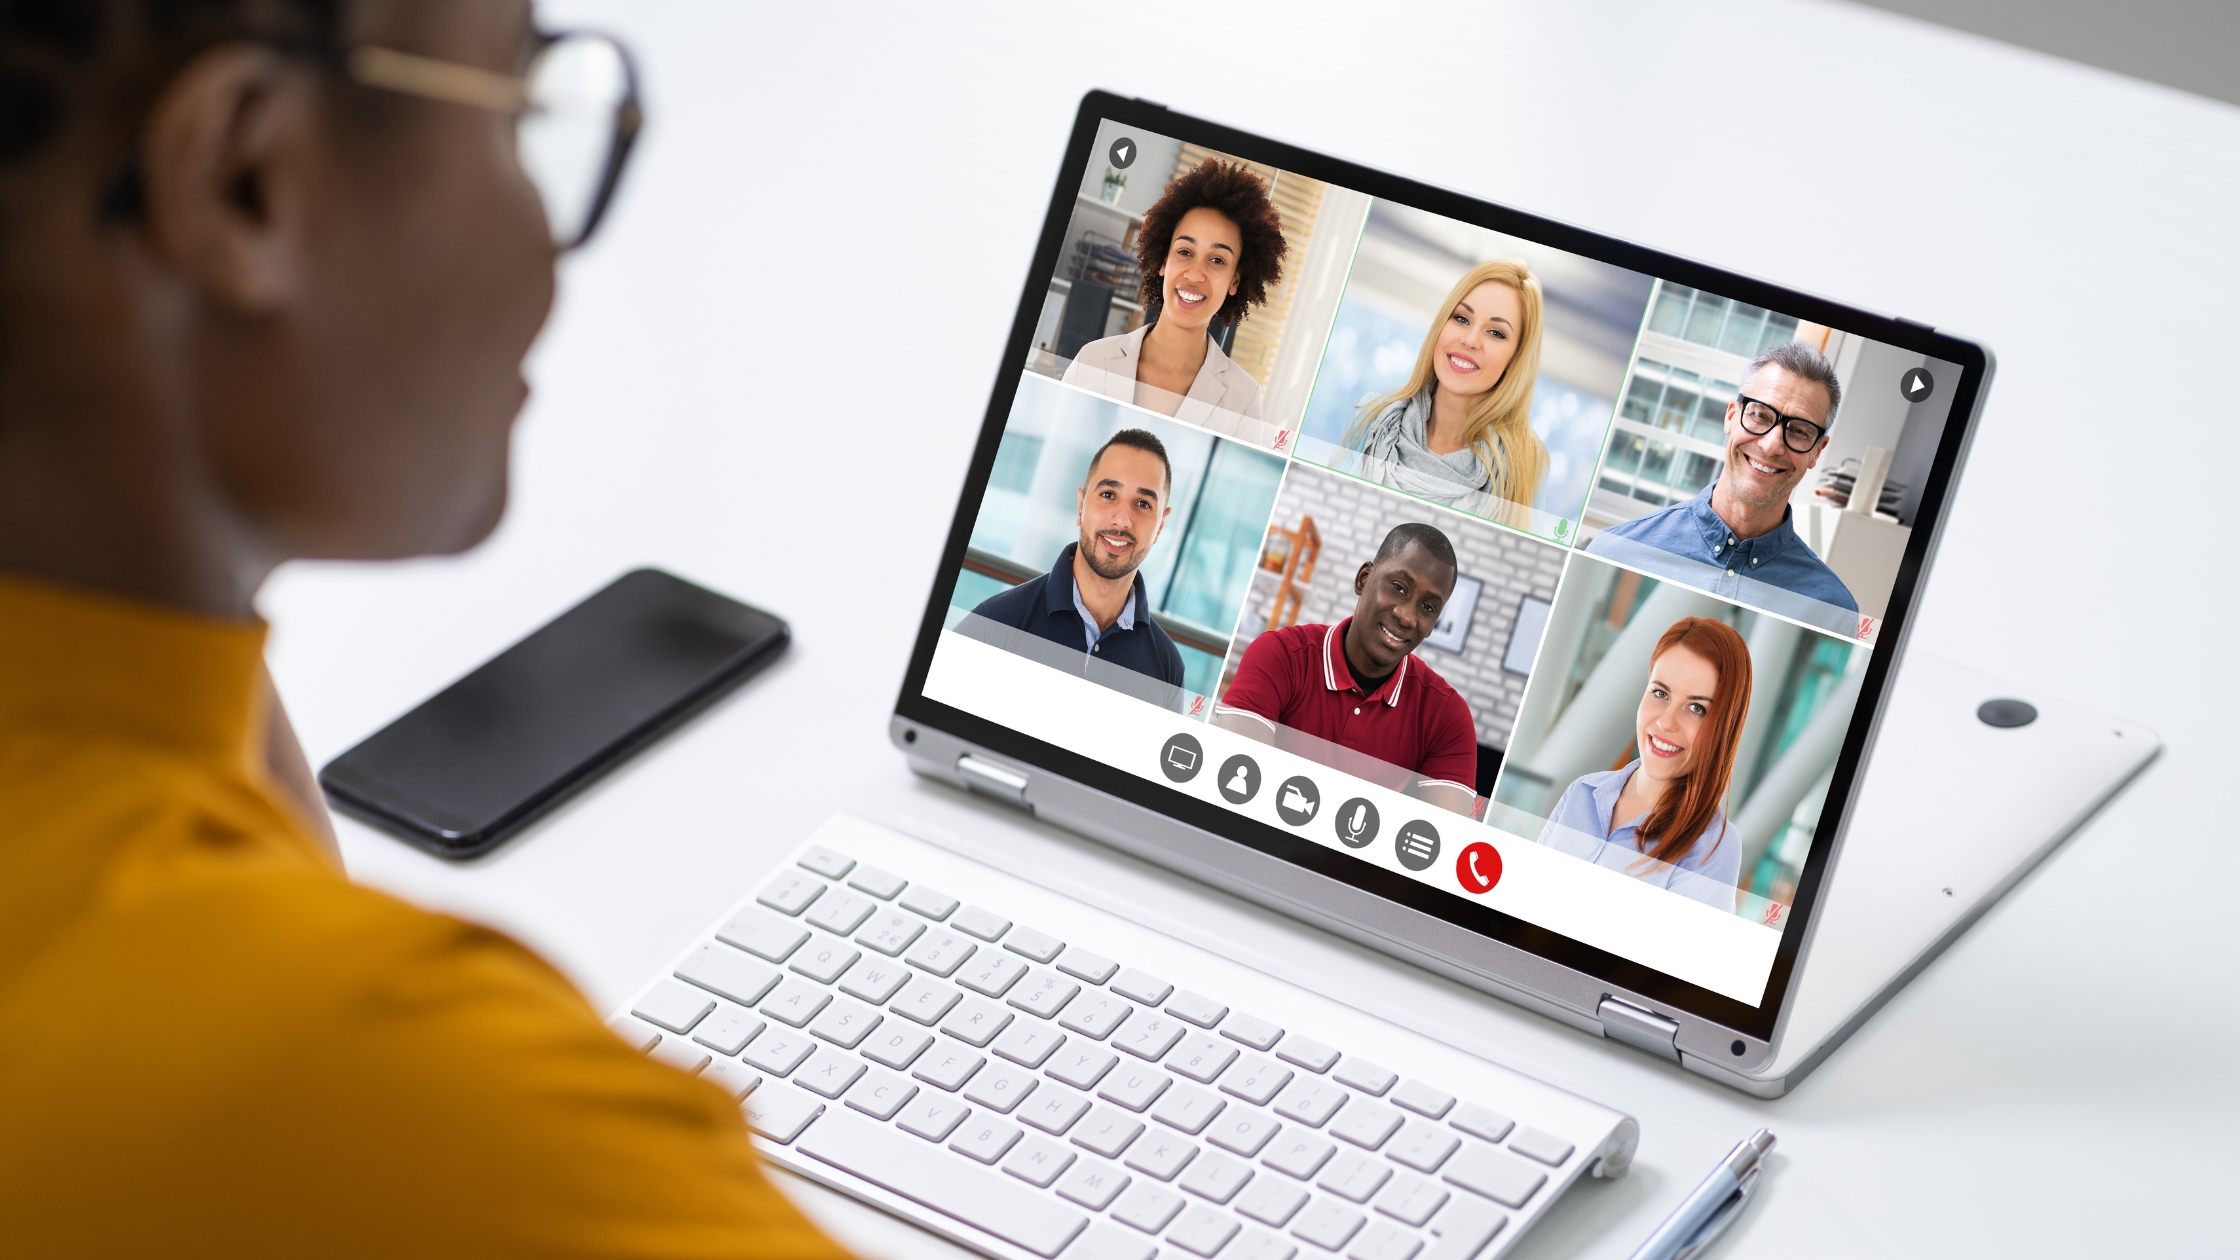 8 Online Games for Remote Teams to Build Rapport